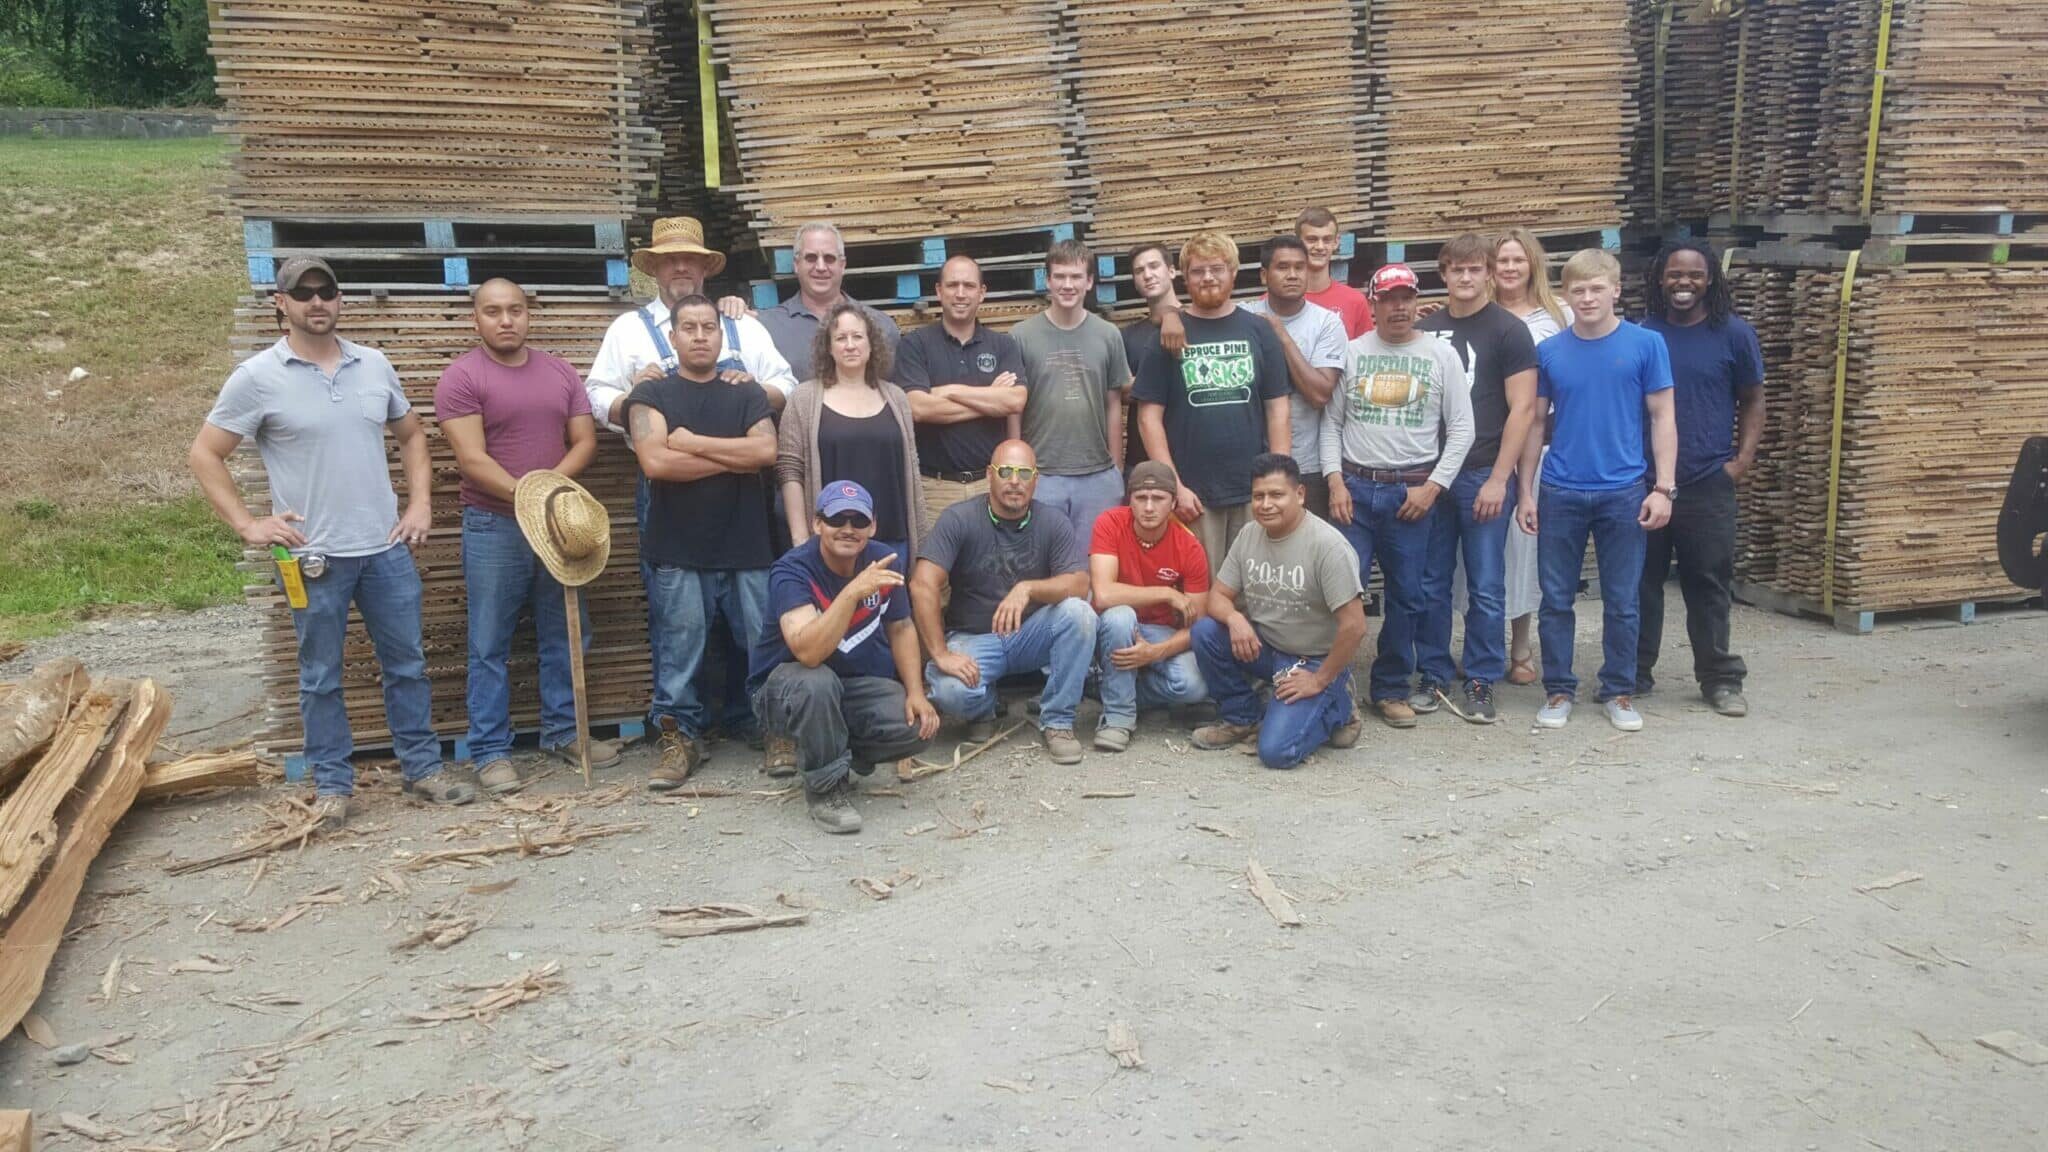 The Yard and Office Crew of the Bark House at Highland Craftsmen, Inc.